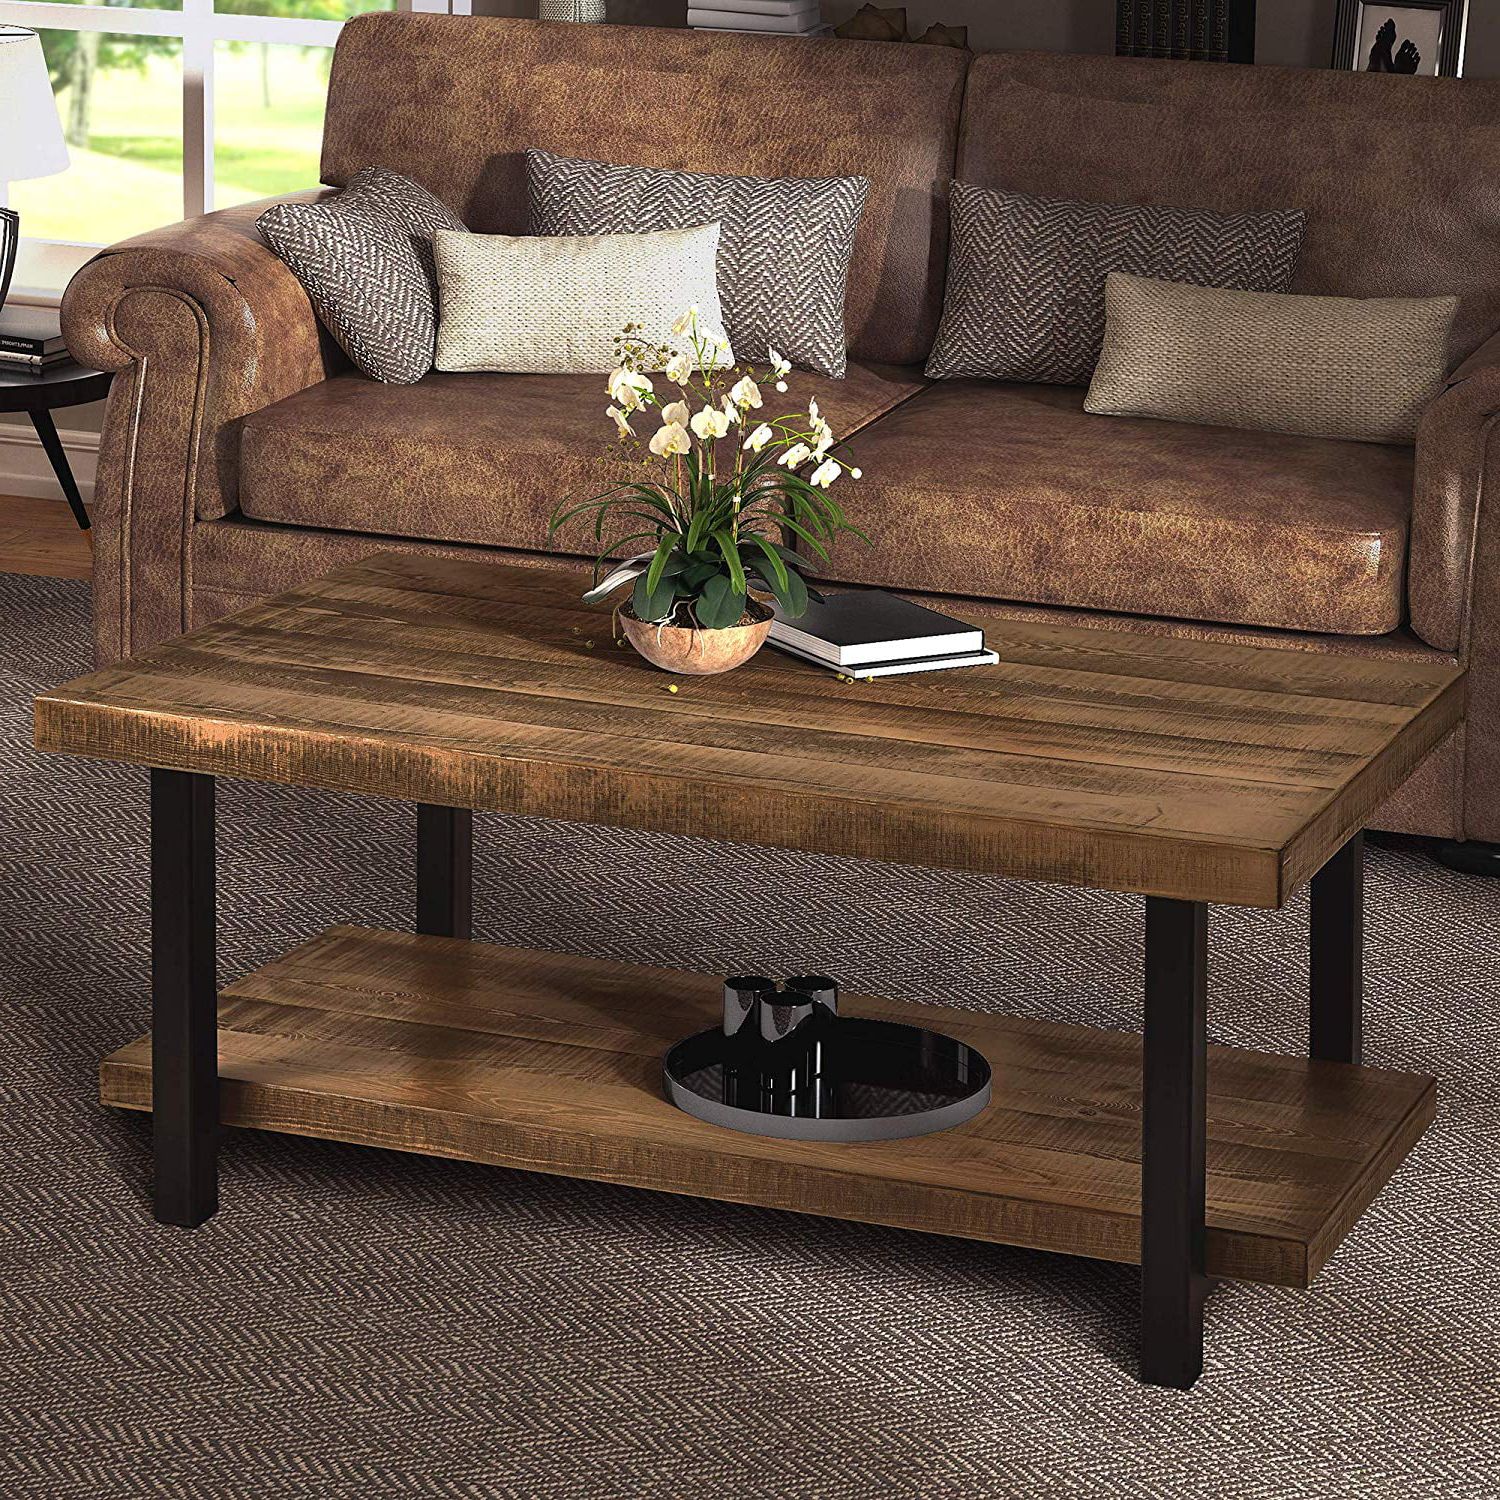 Harper&bright Designs Industrial Rectangular Pine Wood Coffee Table Pertaining To Brown Rustic Coffee Tables (View 7 of 20)